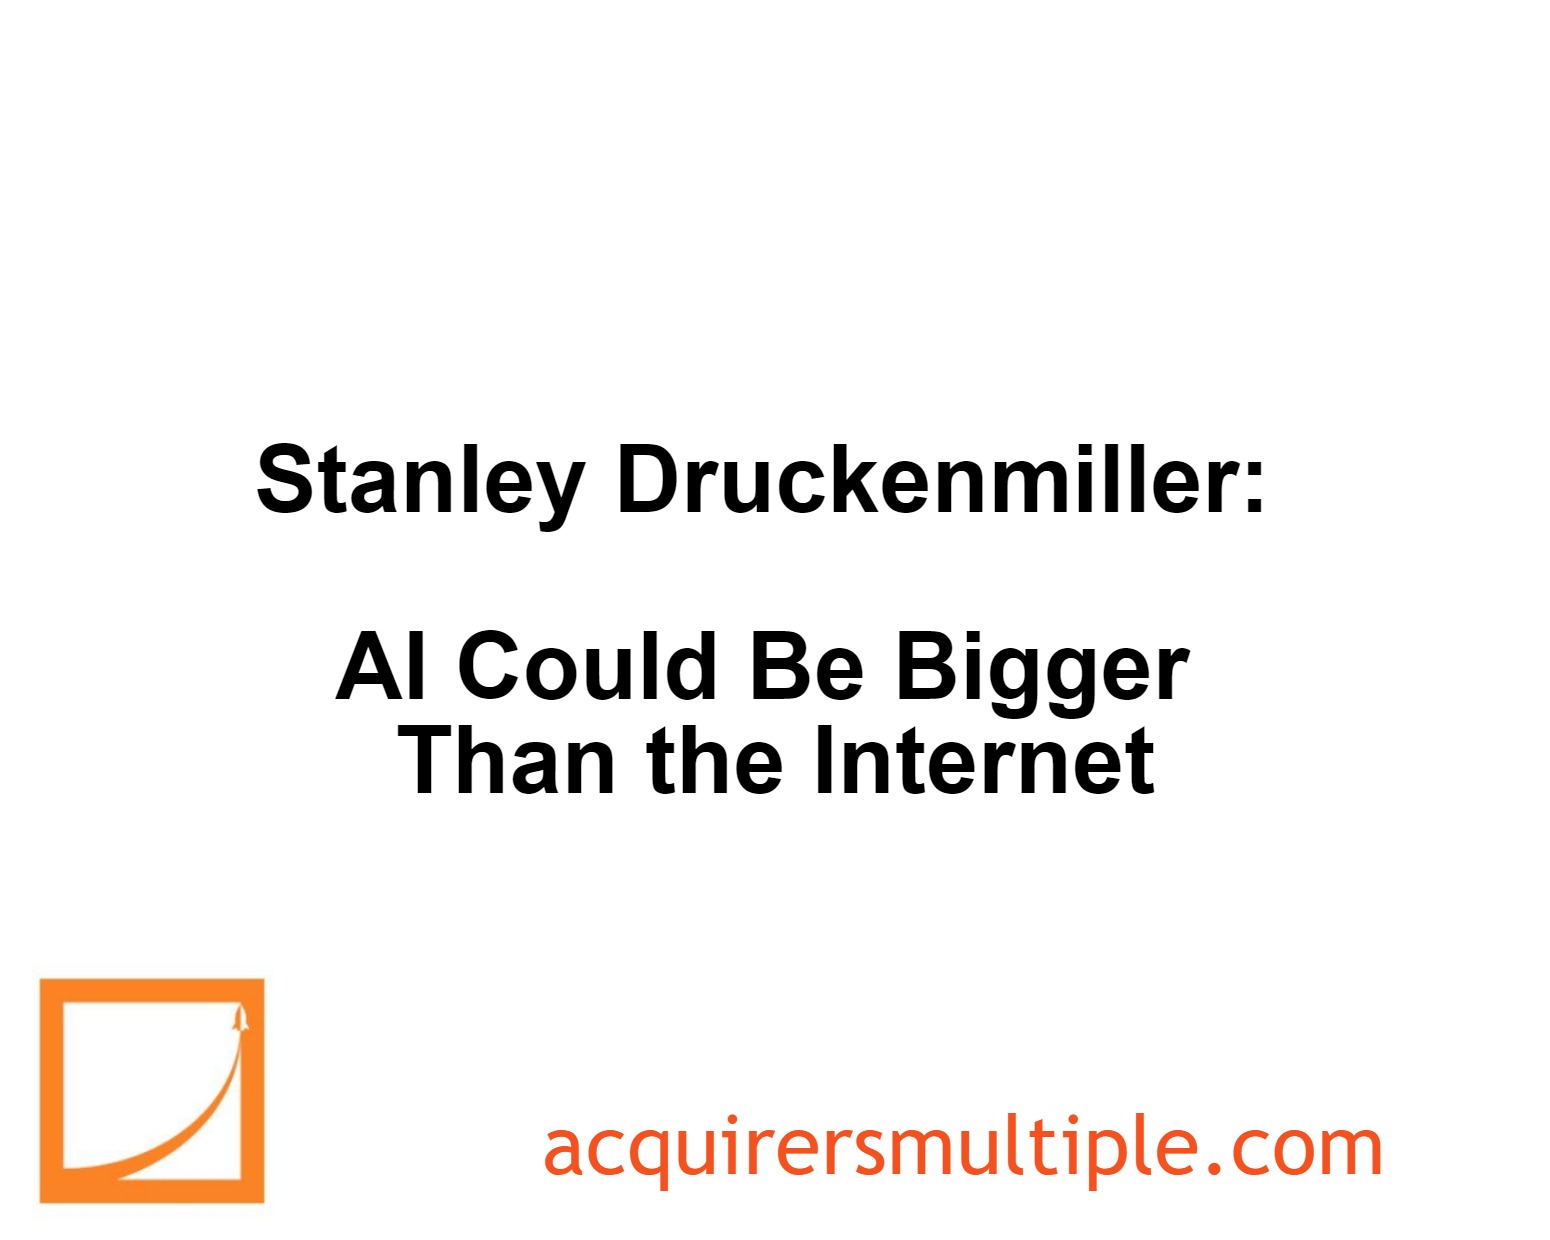 Stanley Druckenmiller: AI Could Be Bigger Than the Internet